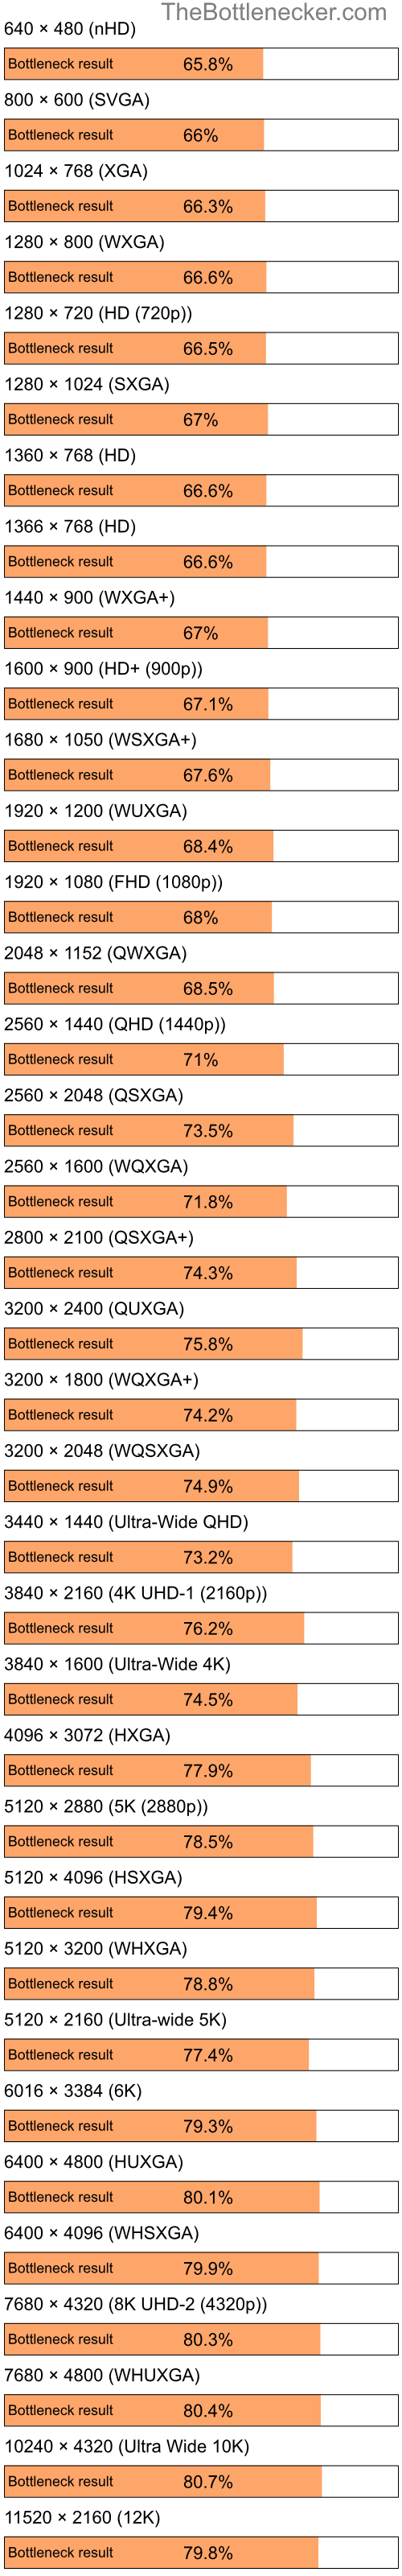 Bottleneck results by resolution for Intel Celeron and Intel G45 in Graphic Card Intense Tasks